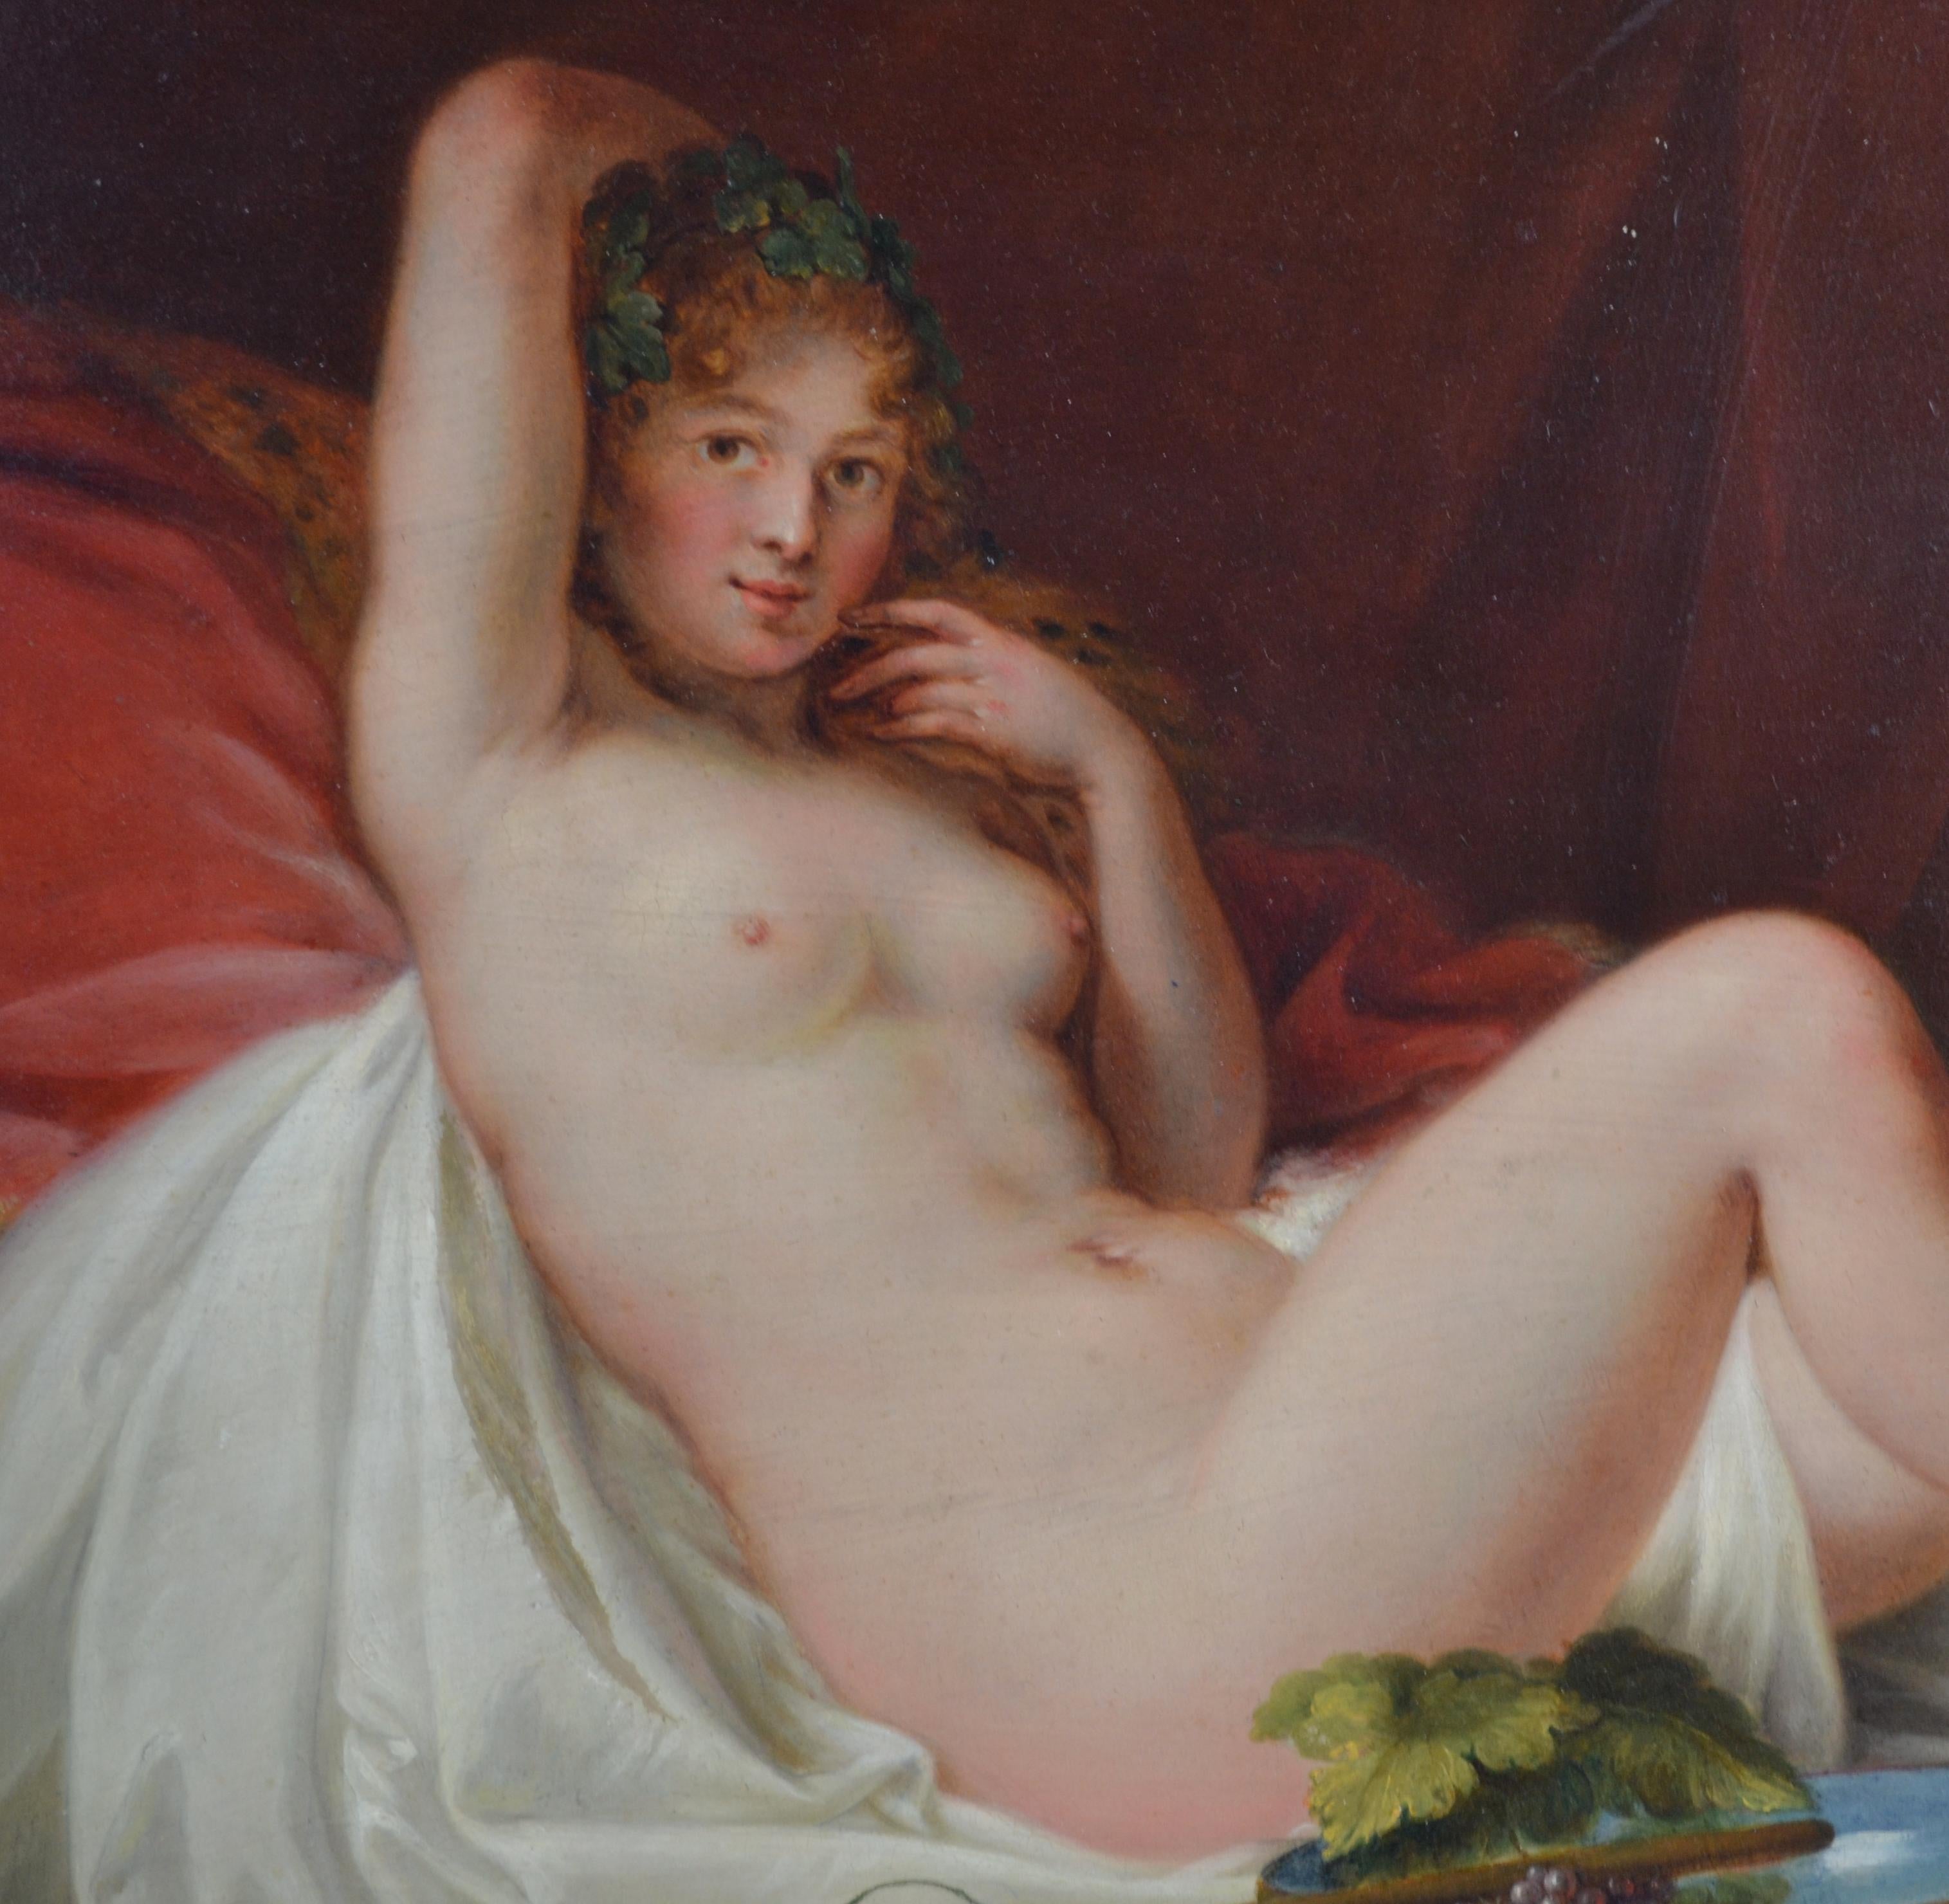 An exquisite and rare late 18th century oil on copper plate of a reclining nude by Austrian artist Adam J. Braun, (1748-1827) in the manner of Titian’s Venus of Urbino. Excerpt for a painting by the artist held at the highly acclaimed Royal